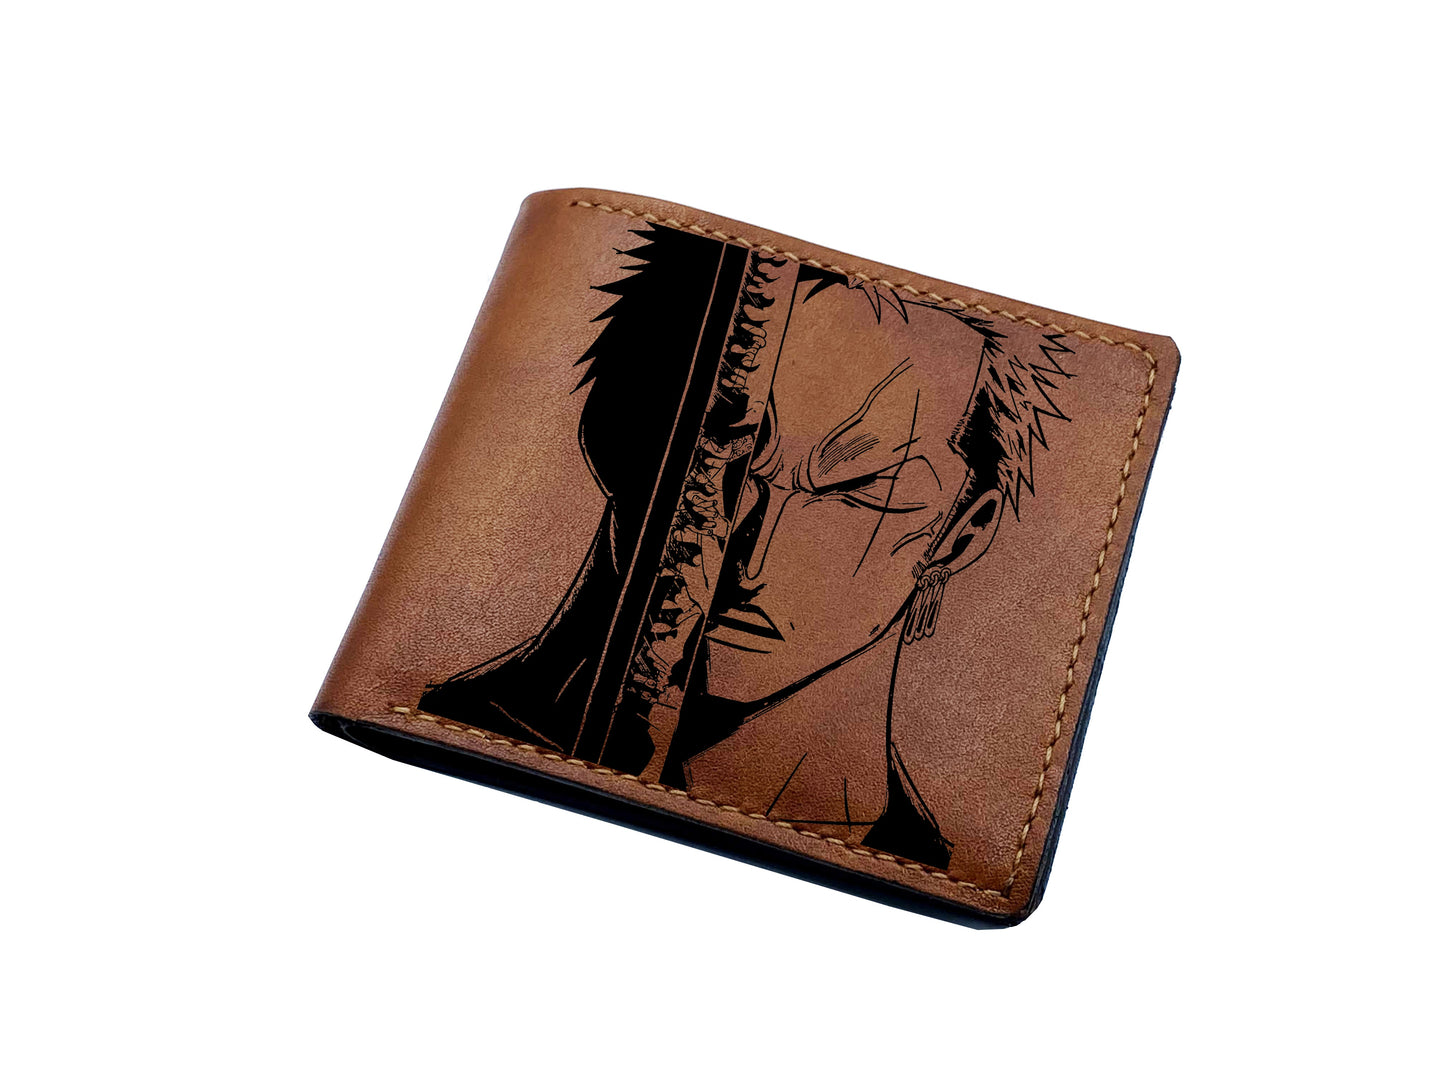 Mayan Corner - Luffy One piece engraving wallet, customized anime wallet, cute wallet for brother, birthday gift ideas for him